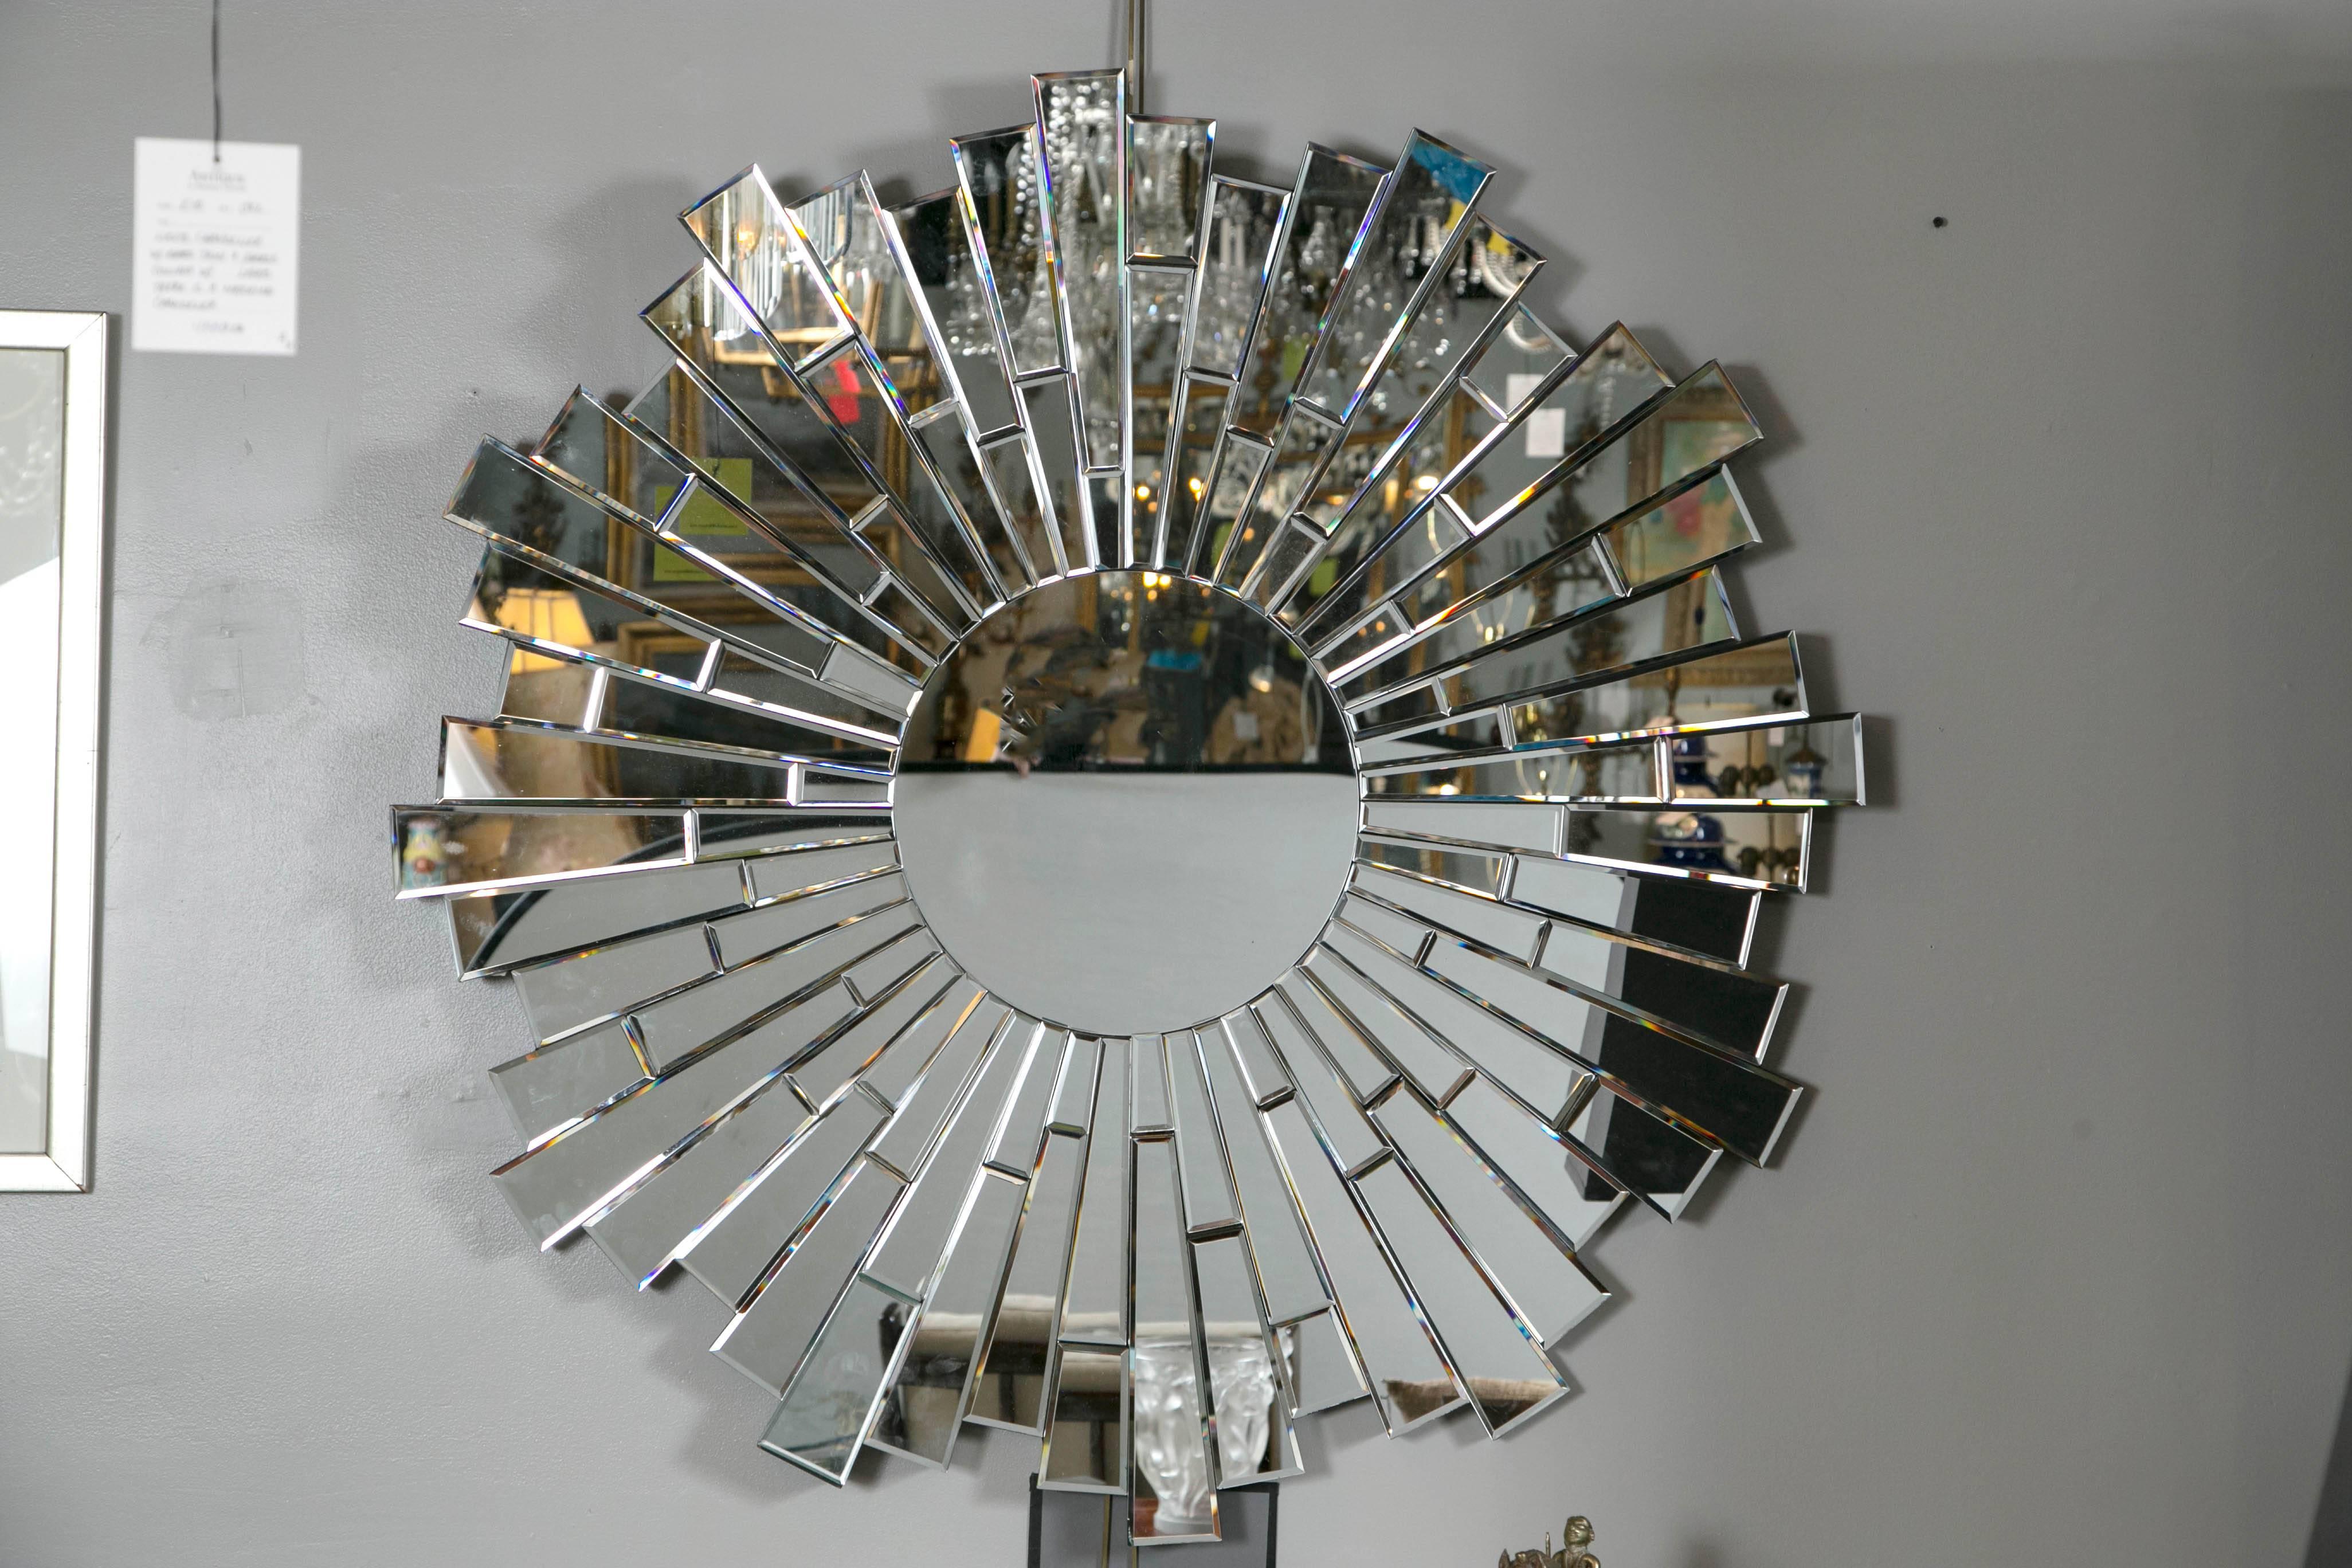 Large sunburst mirror comprised of individual pieces of beveled mirror that surround center mirror. All mirrors are mounted on wood.